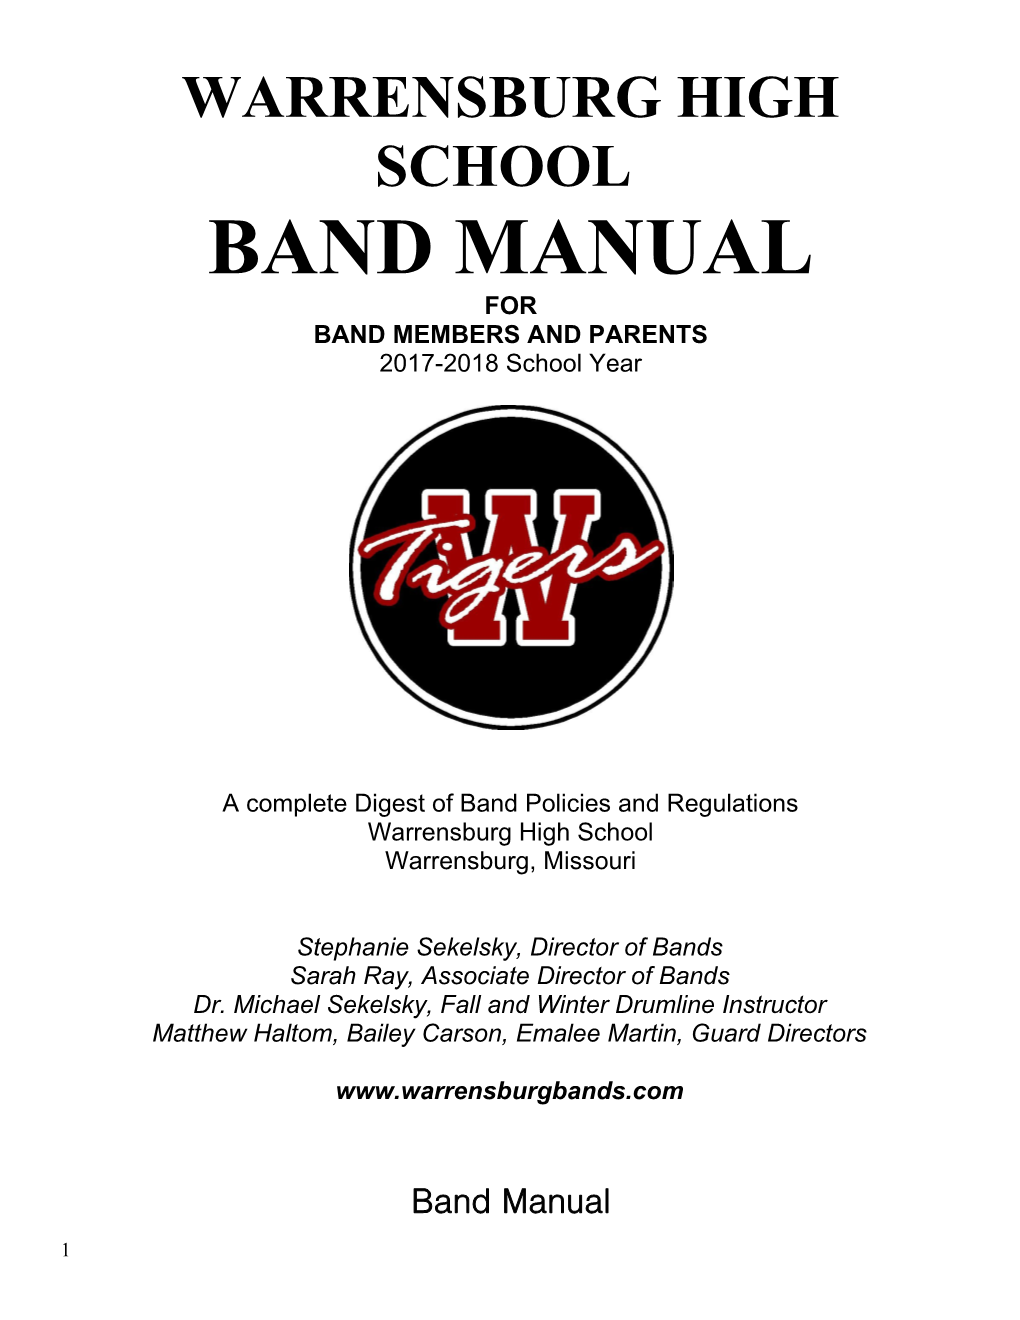 Band Members and Parents